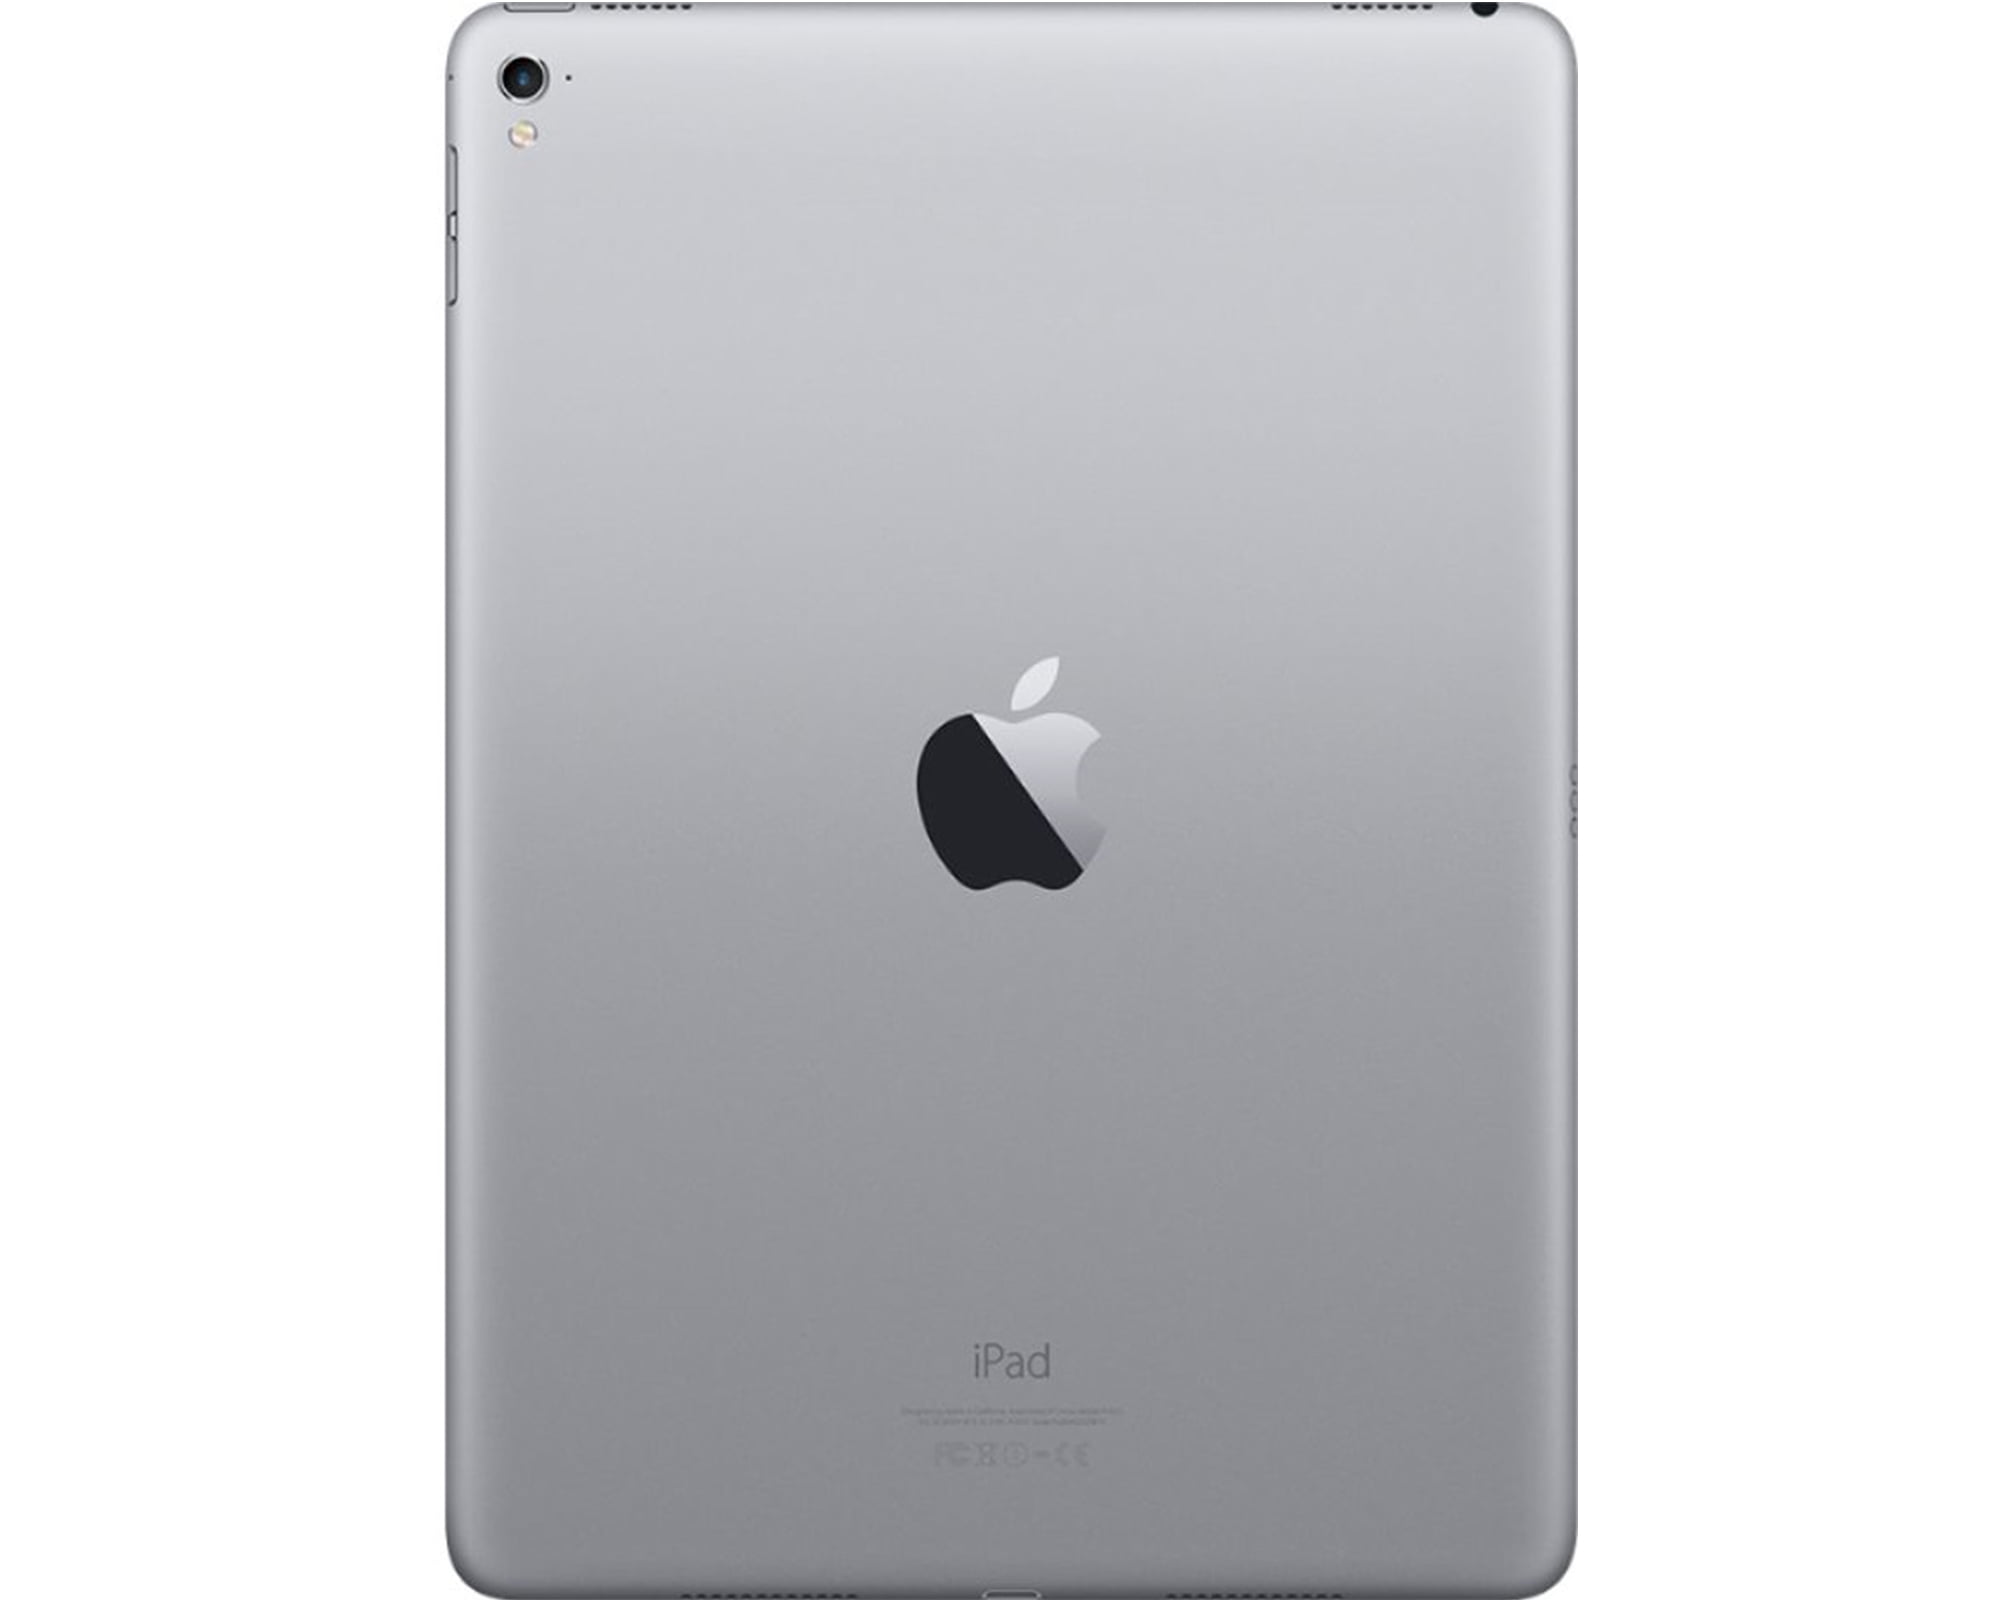 Restored Apple iPad Pro 9.7-inch Wi-Fi Only 256GB Latest OS Bundle:  Pre-Installed Tempered Glass, Case, Rapid Charger, Bluetooth/Wireless  Airbuds By Certified 2 Day Express (Refurbished) 